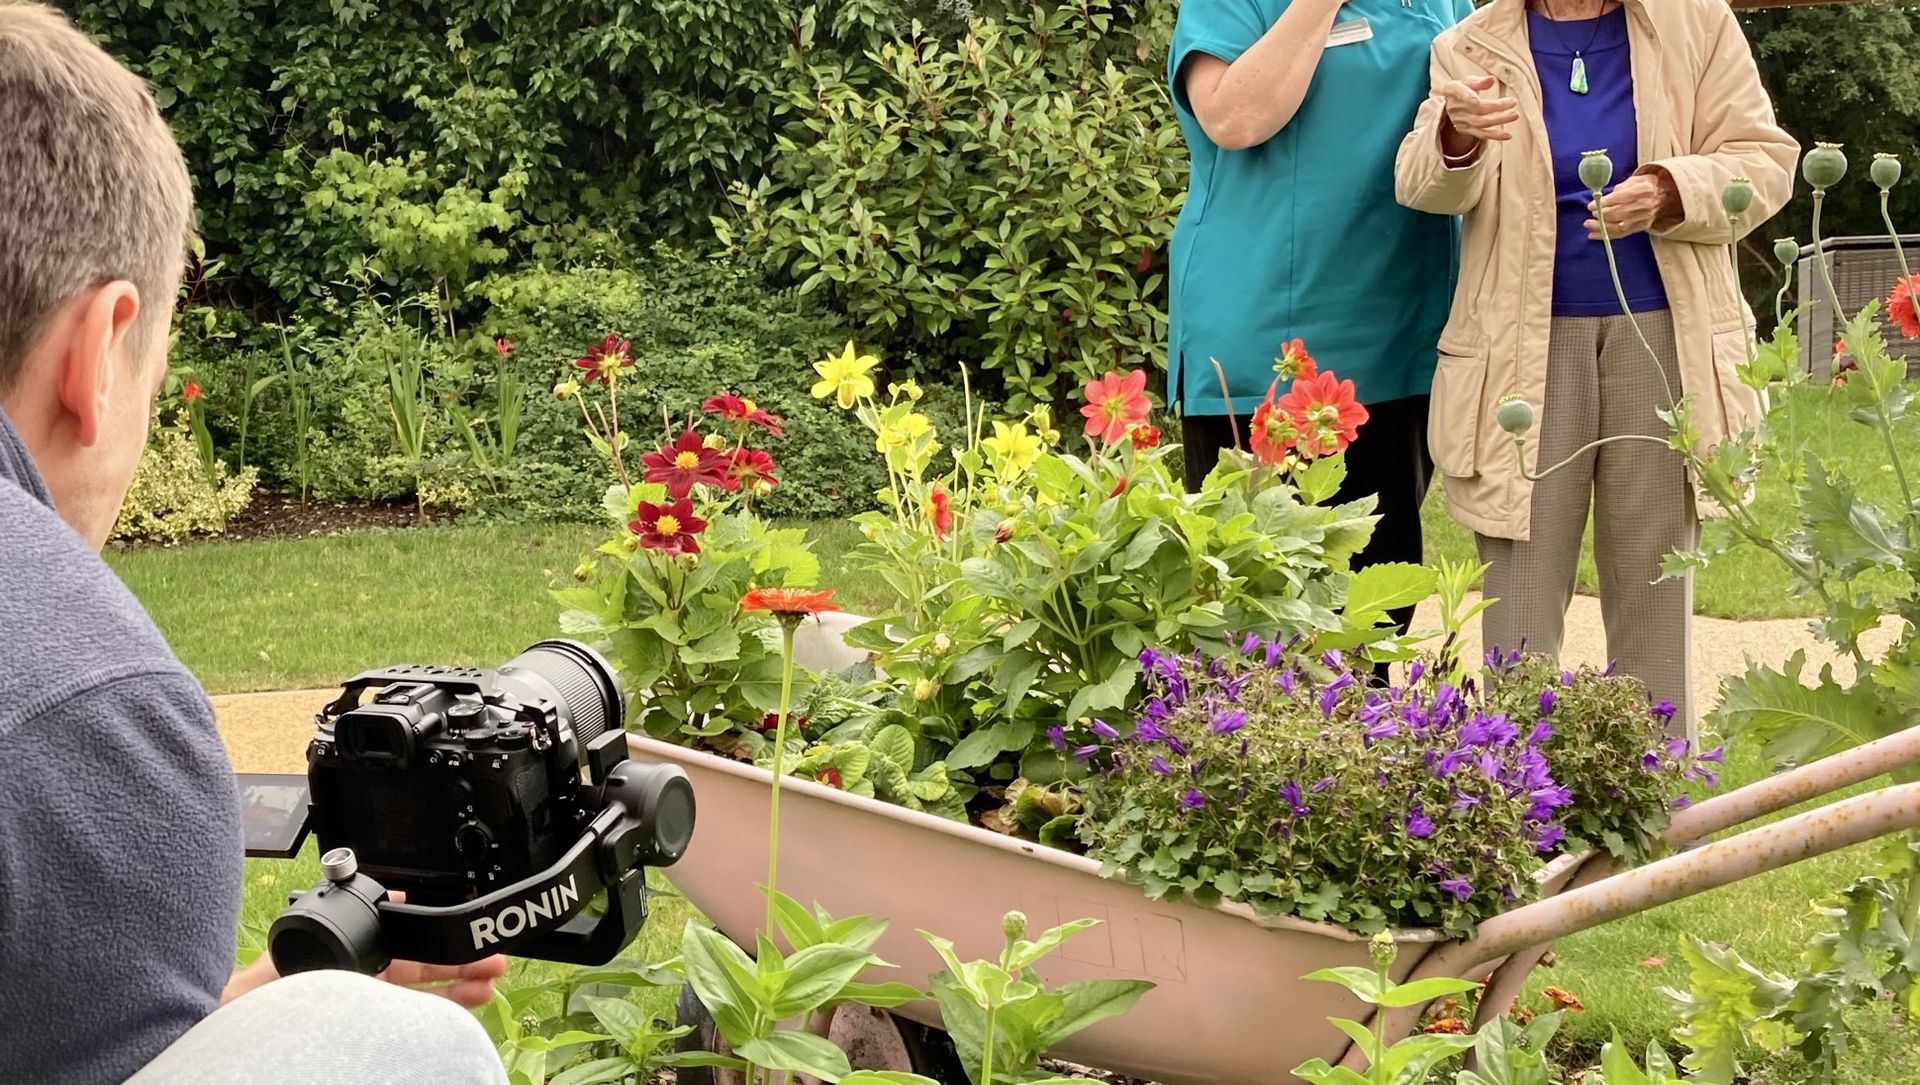 A man is taking a picture of a woman in a wheelbarrow in a garden.